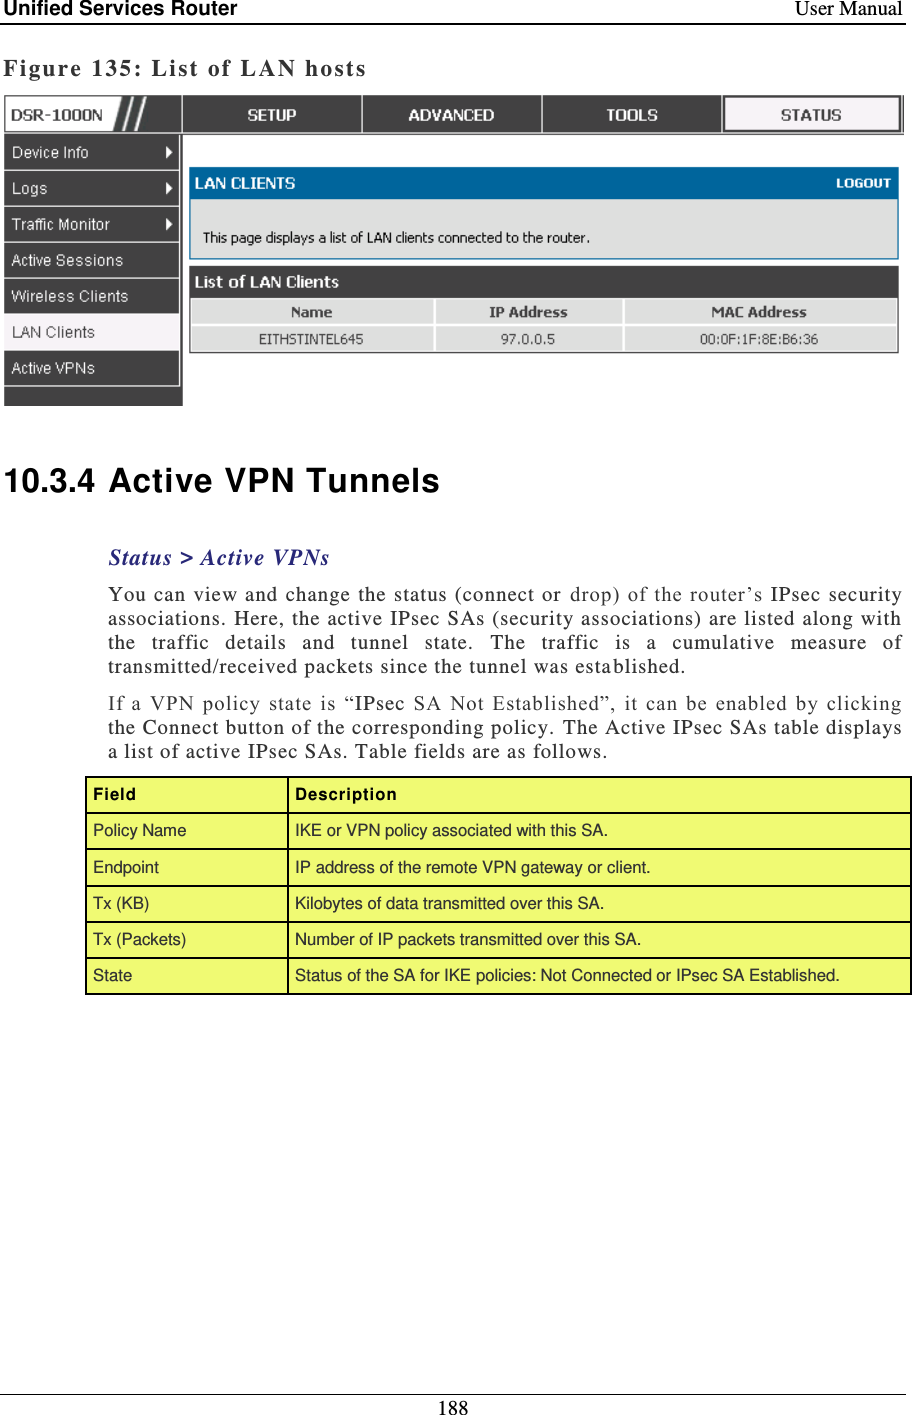 Unified Services Router    User Manual 188  Figure 135: List of LAN hosts    10.3.4 Active VPN Tunnels Status &gt; Active VPNs You  can  view and change  the  status (connect or drop) of  the router’s  IPsec  security associations. Here, the active IPsec SAs (security associations) are listed along with the  traffic  details  and  tunnel  state.  The  traffic  is  a  cumulative  measure  of transmitted/received packets since the tunnel was esta blished.  If  a  VPN  policy  state  is  “IPsec  SA  Not  Established”,  it  can  be  enabled  by  clicking the Connect button of the corresponding policy. The Active IPsec SAs table displays a list of active IPsec SAs. Table fields are as follows. Field  Description Policy Name IKE or VPN policy associated with this SA. Endpoint IP address of the remote VPN gateway or client. Tx (KB) Kilobytes of data transmitted over this SA. Tx (Packets) Number of IP packets transmitted over this SA. State Status of the SA for IKE policies: Not Connected or IPsec SA Established. 